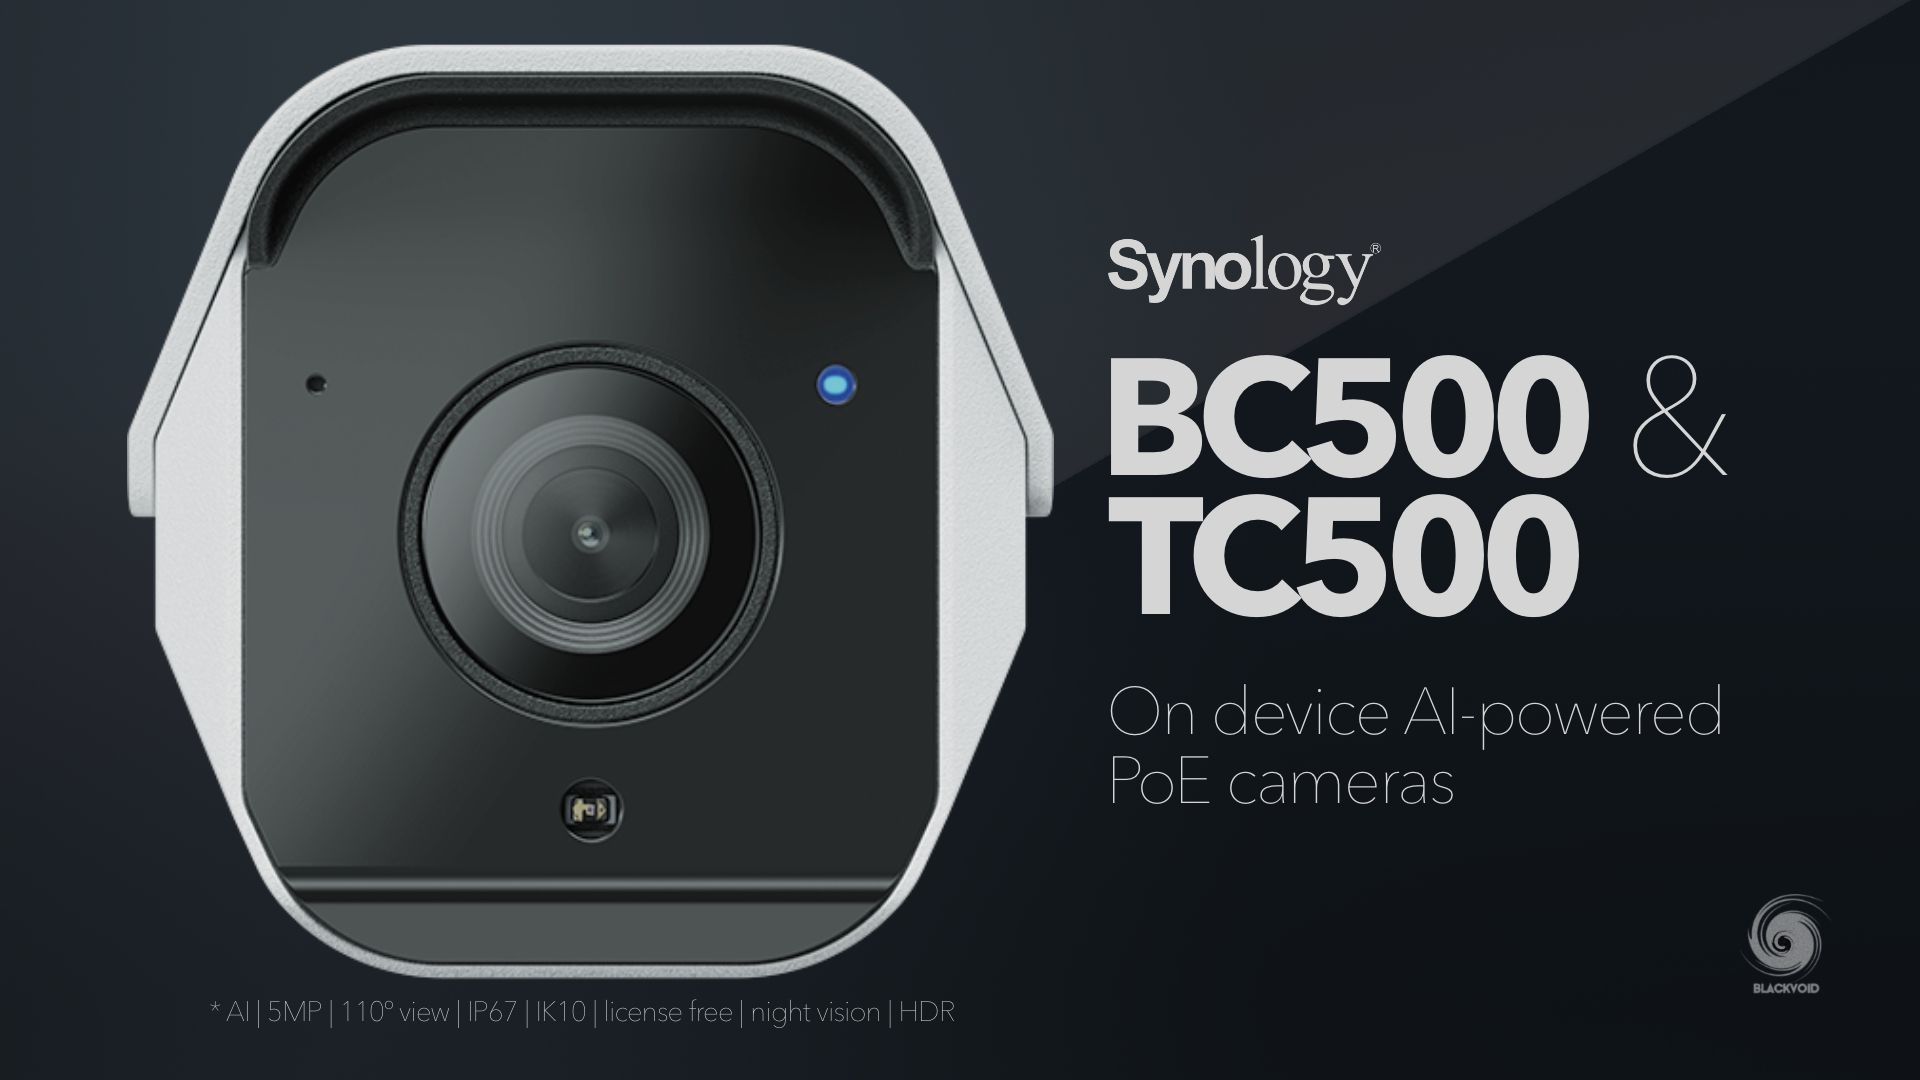 Synology BC500 and TC500 Surveillance Cameras - Should You Buy